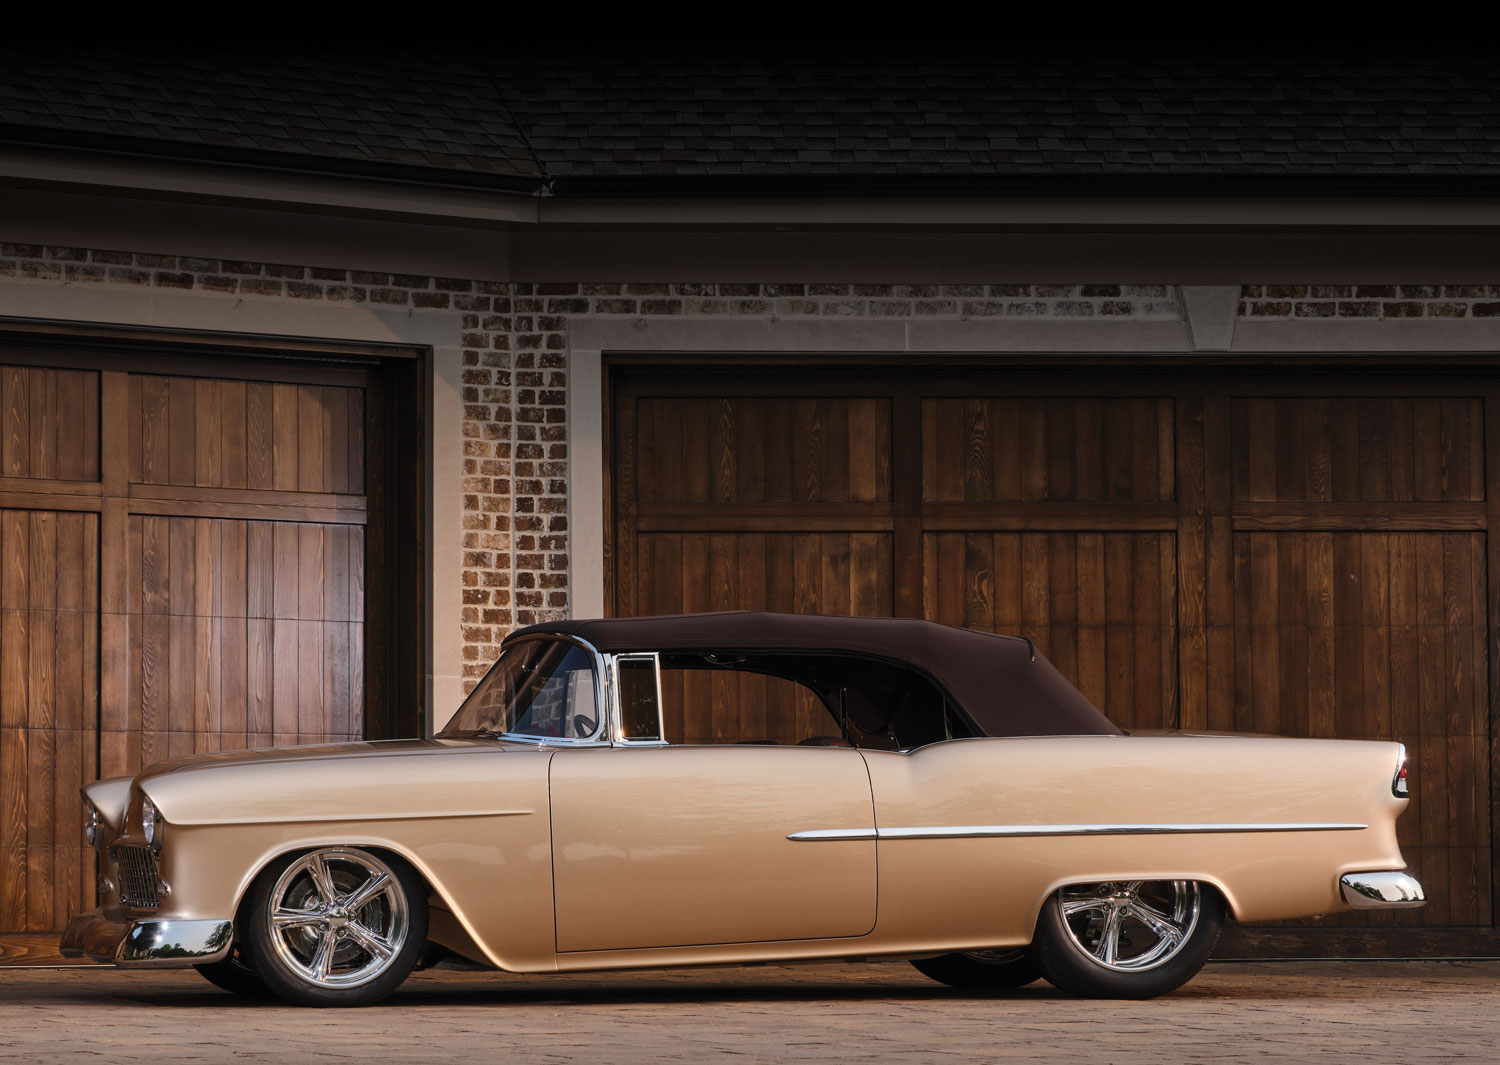 ’55 Chevy side view